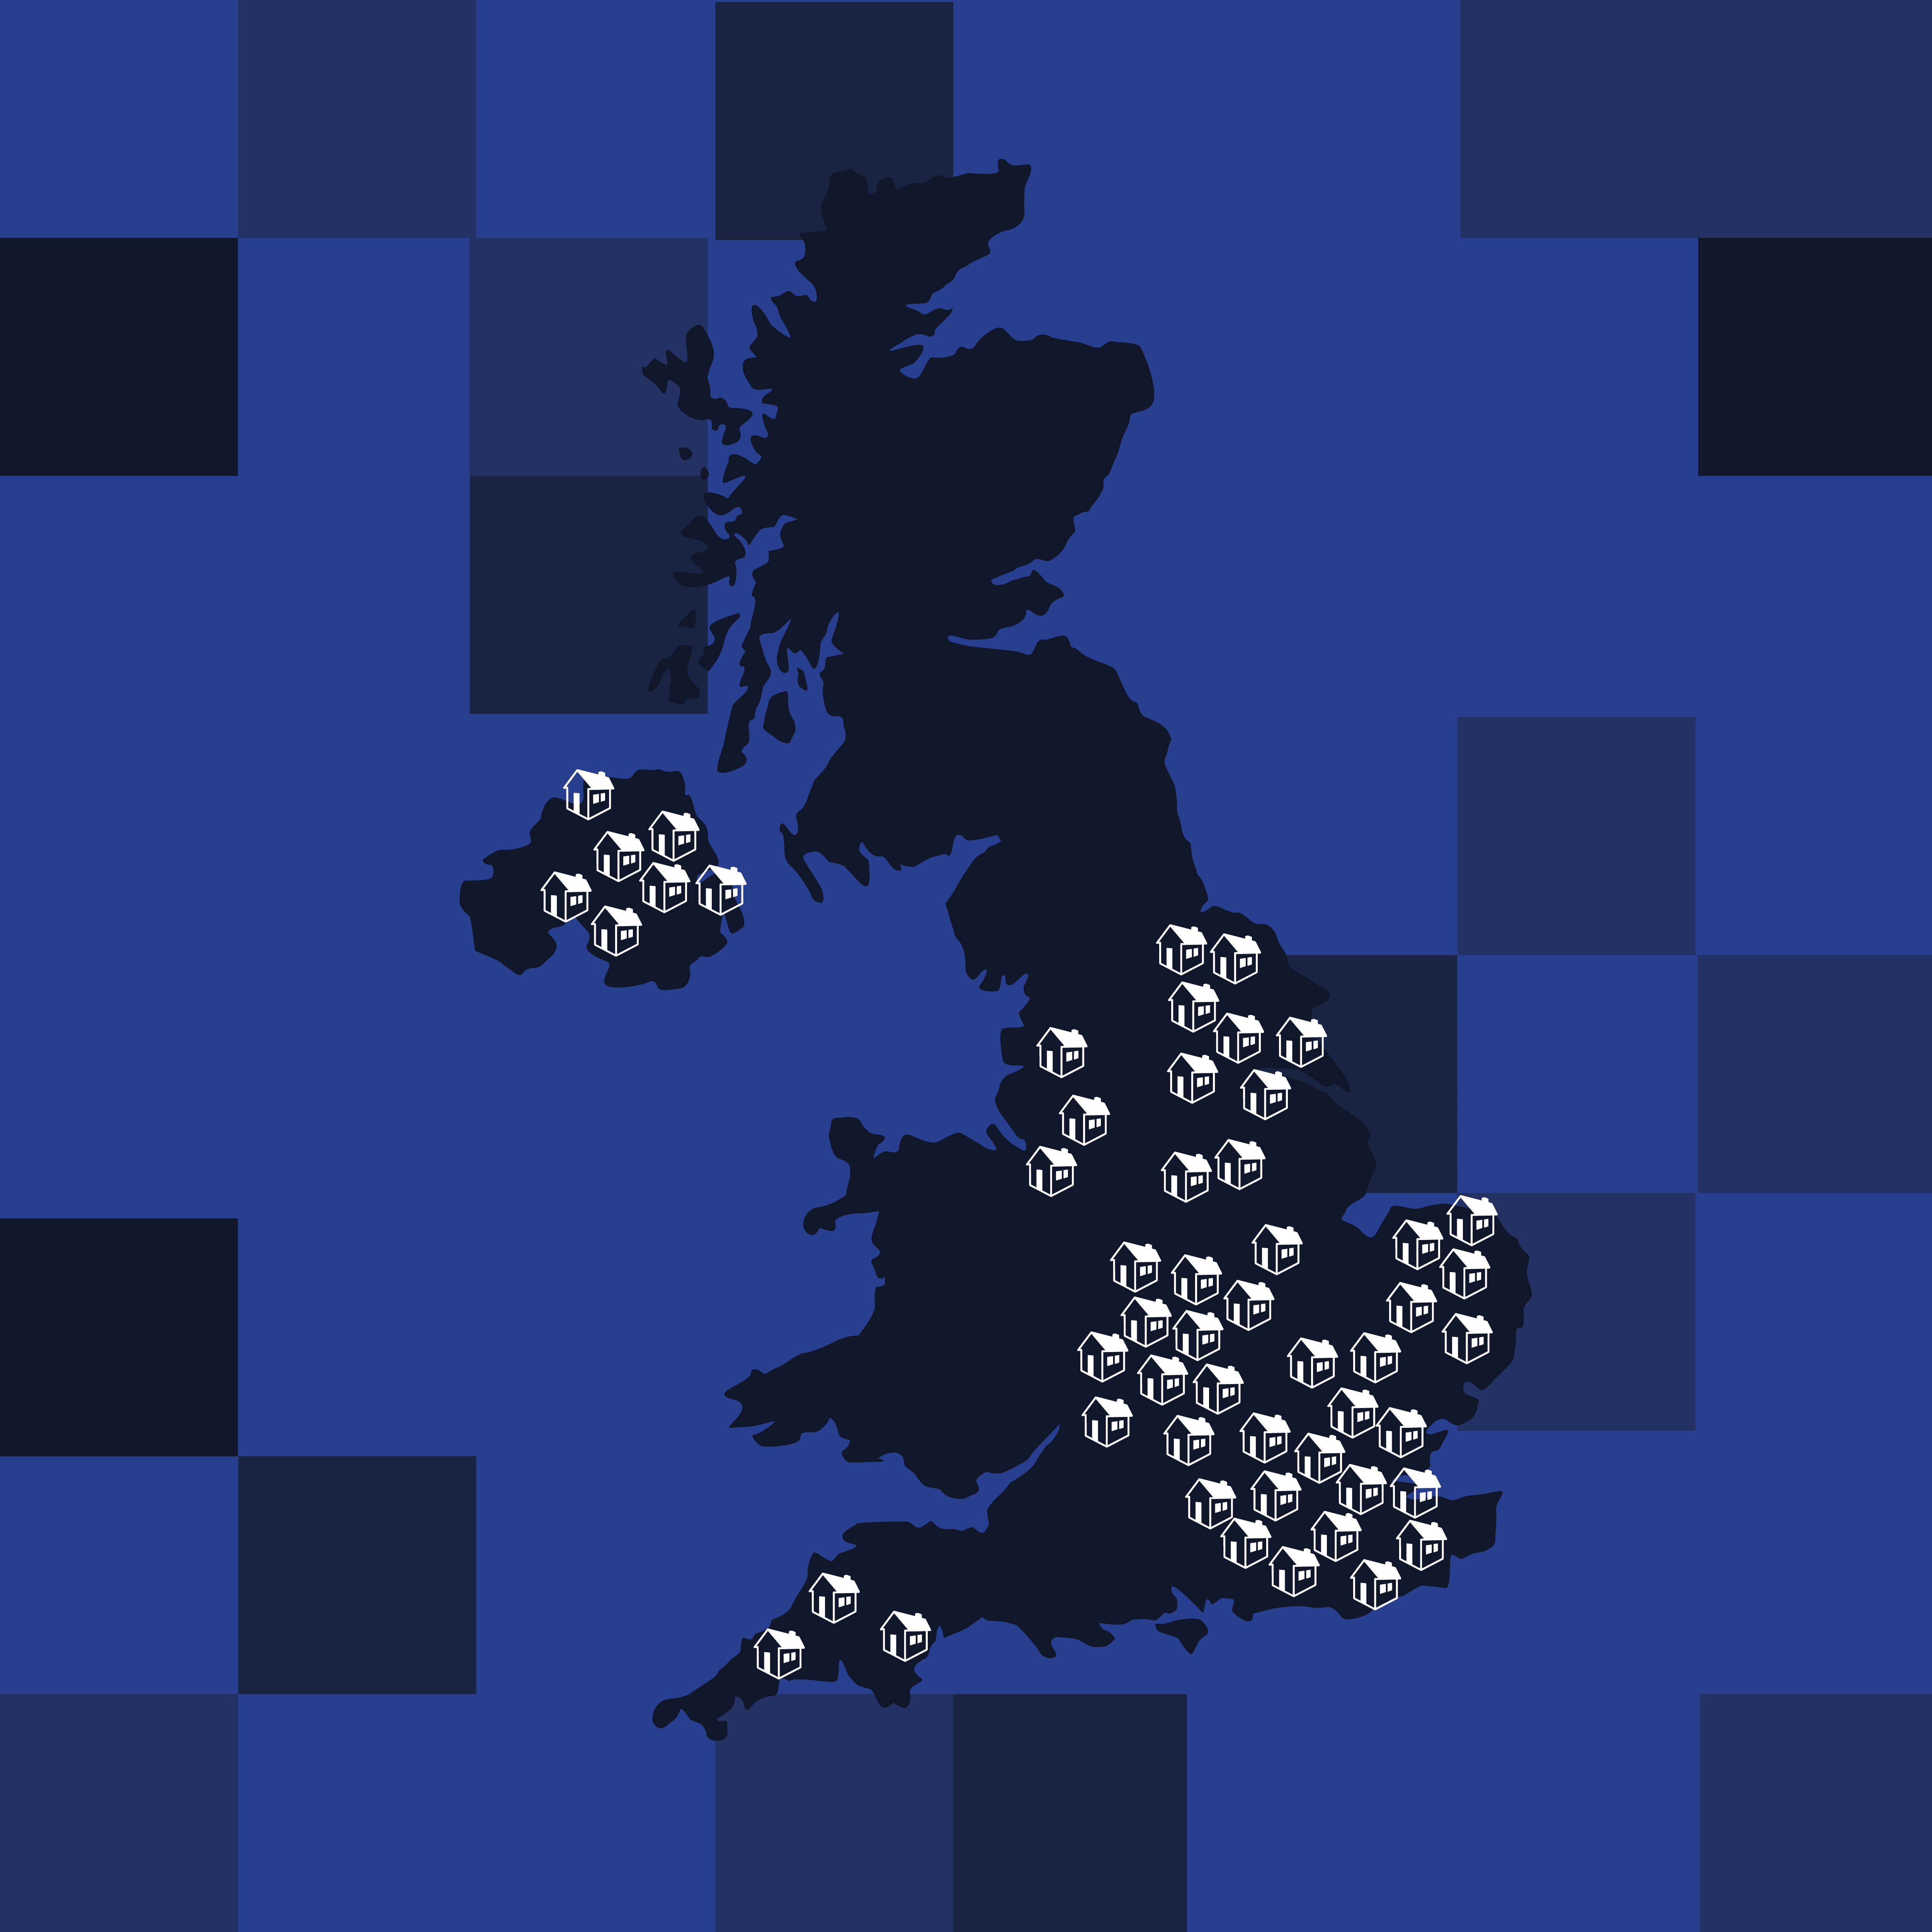 Map of UK showing schoolhouse locations.